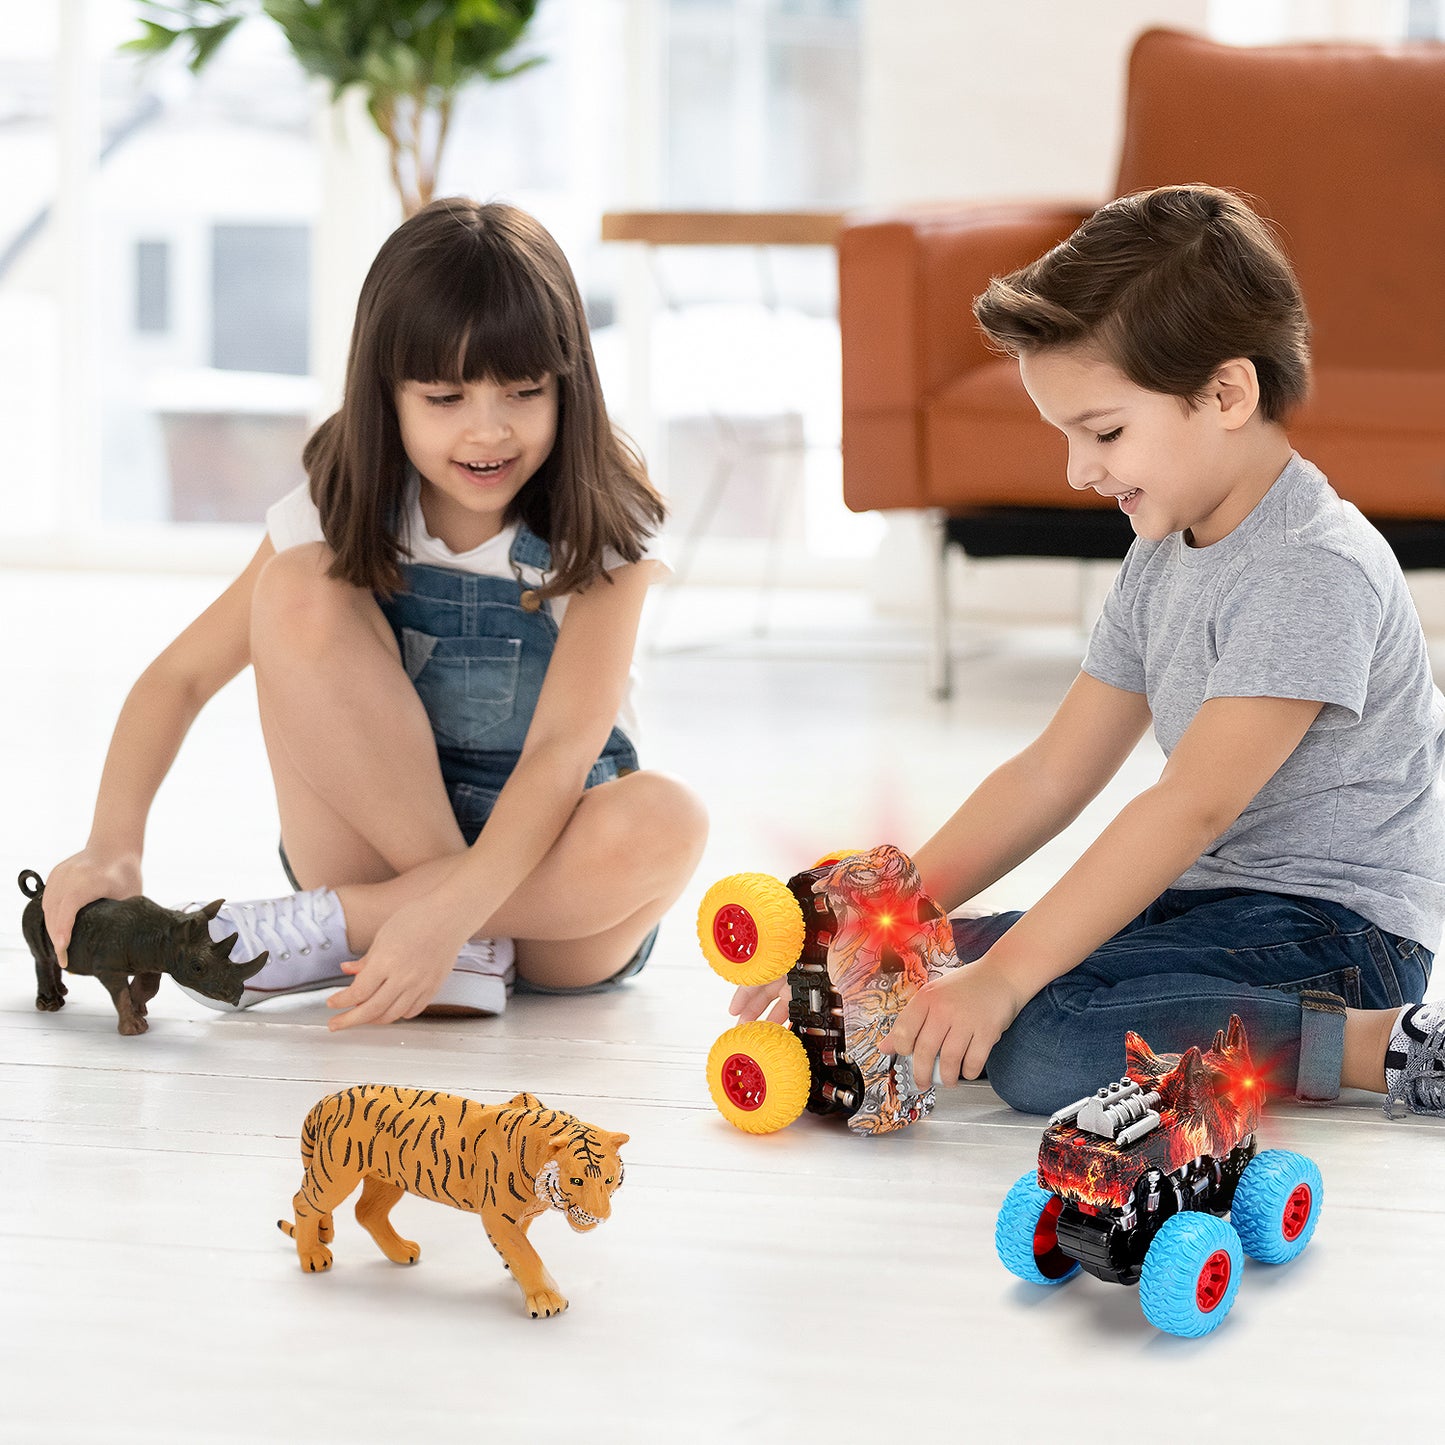 Monster Truck Toy Set - 2 Trucks + 2 Toy Animals | Push and Go Toys for Boys and Girls